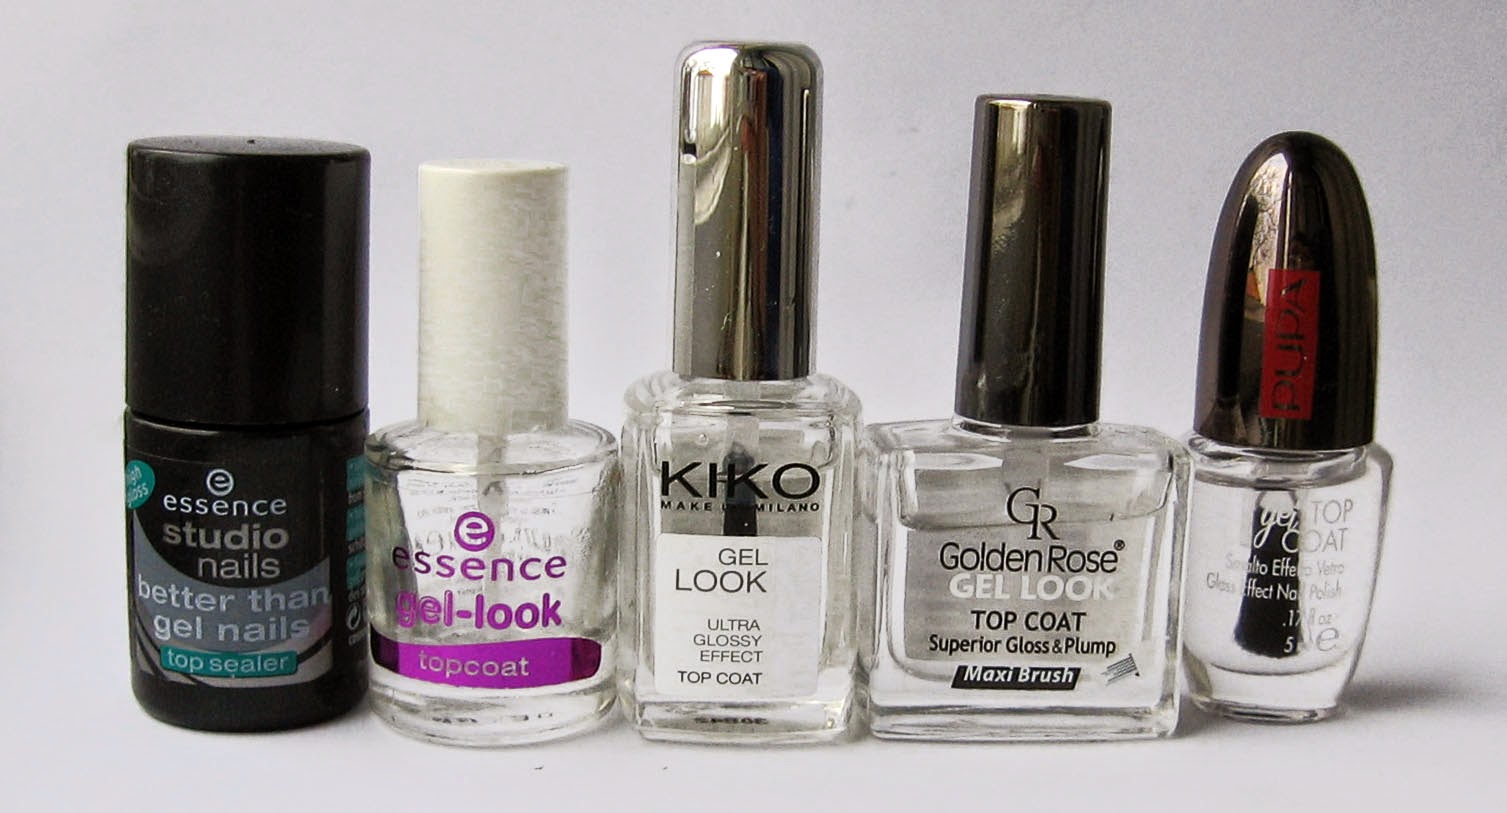 Secretly In Love With Nail Polishes Gel Top Coat Review Essence Kiko Golden Rose Pupa